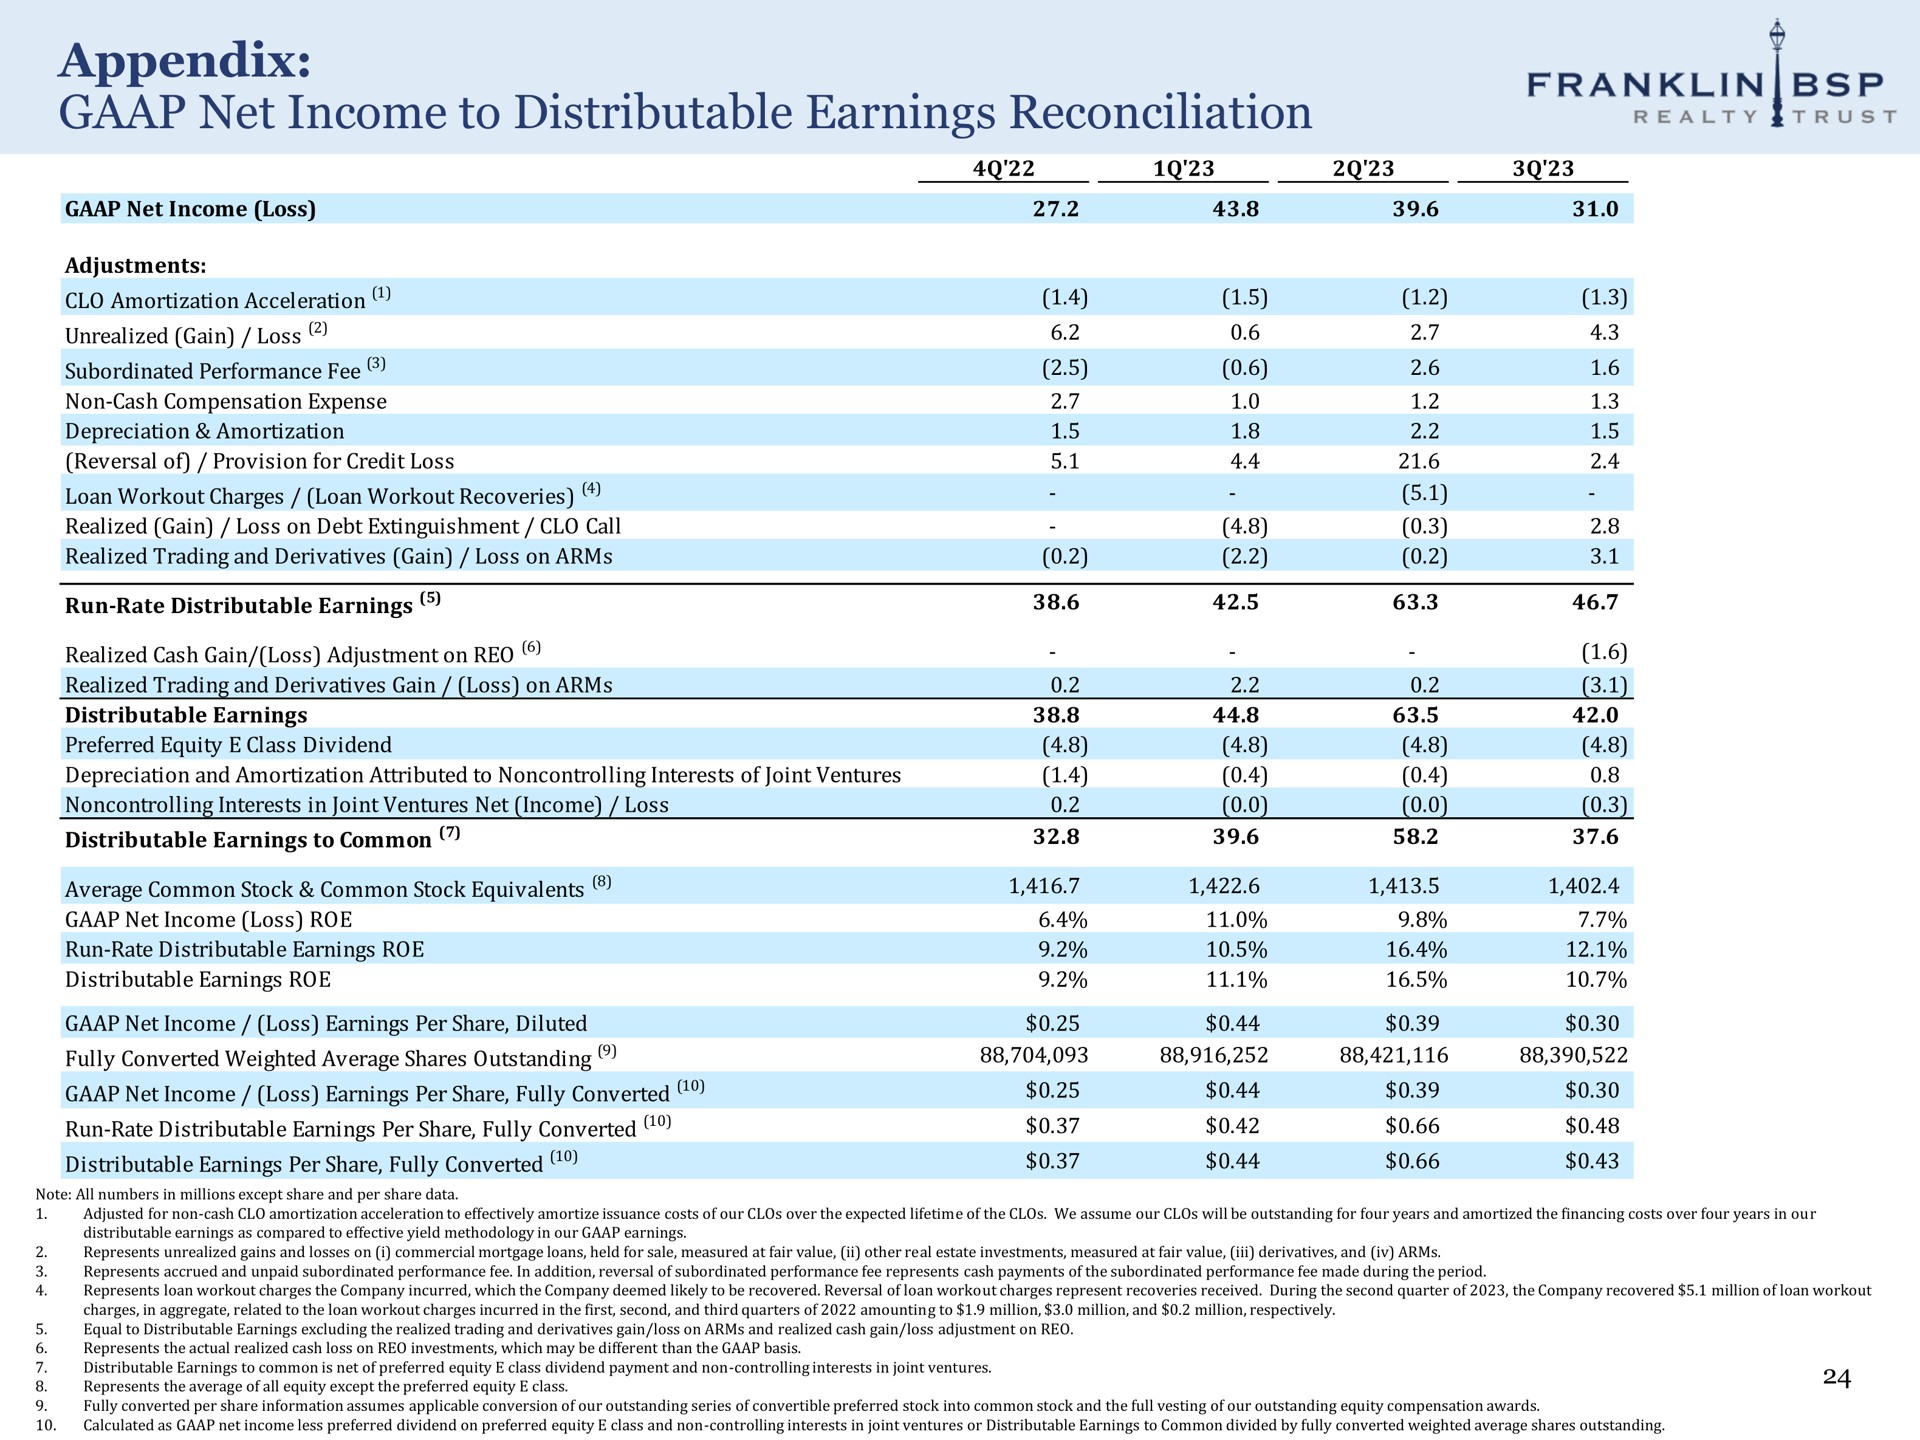 appendix net income to distributable earnings reconciliation yes franklin trust realty | Franklin BSP Realty Trust